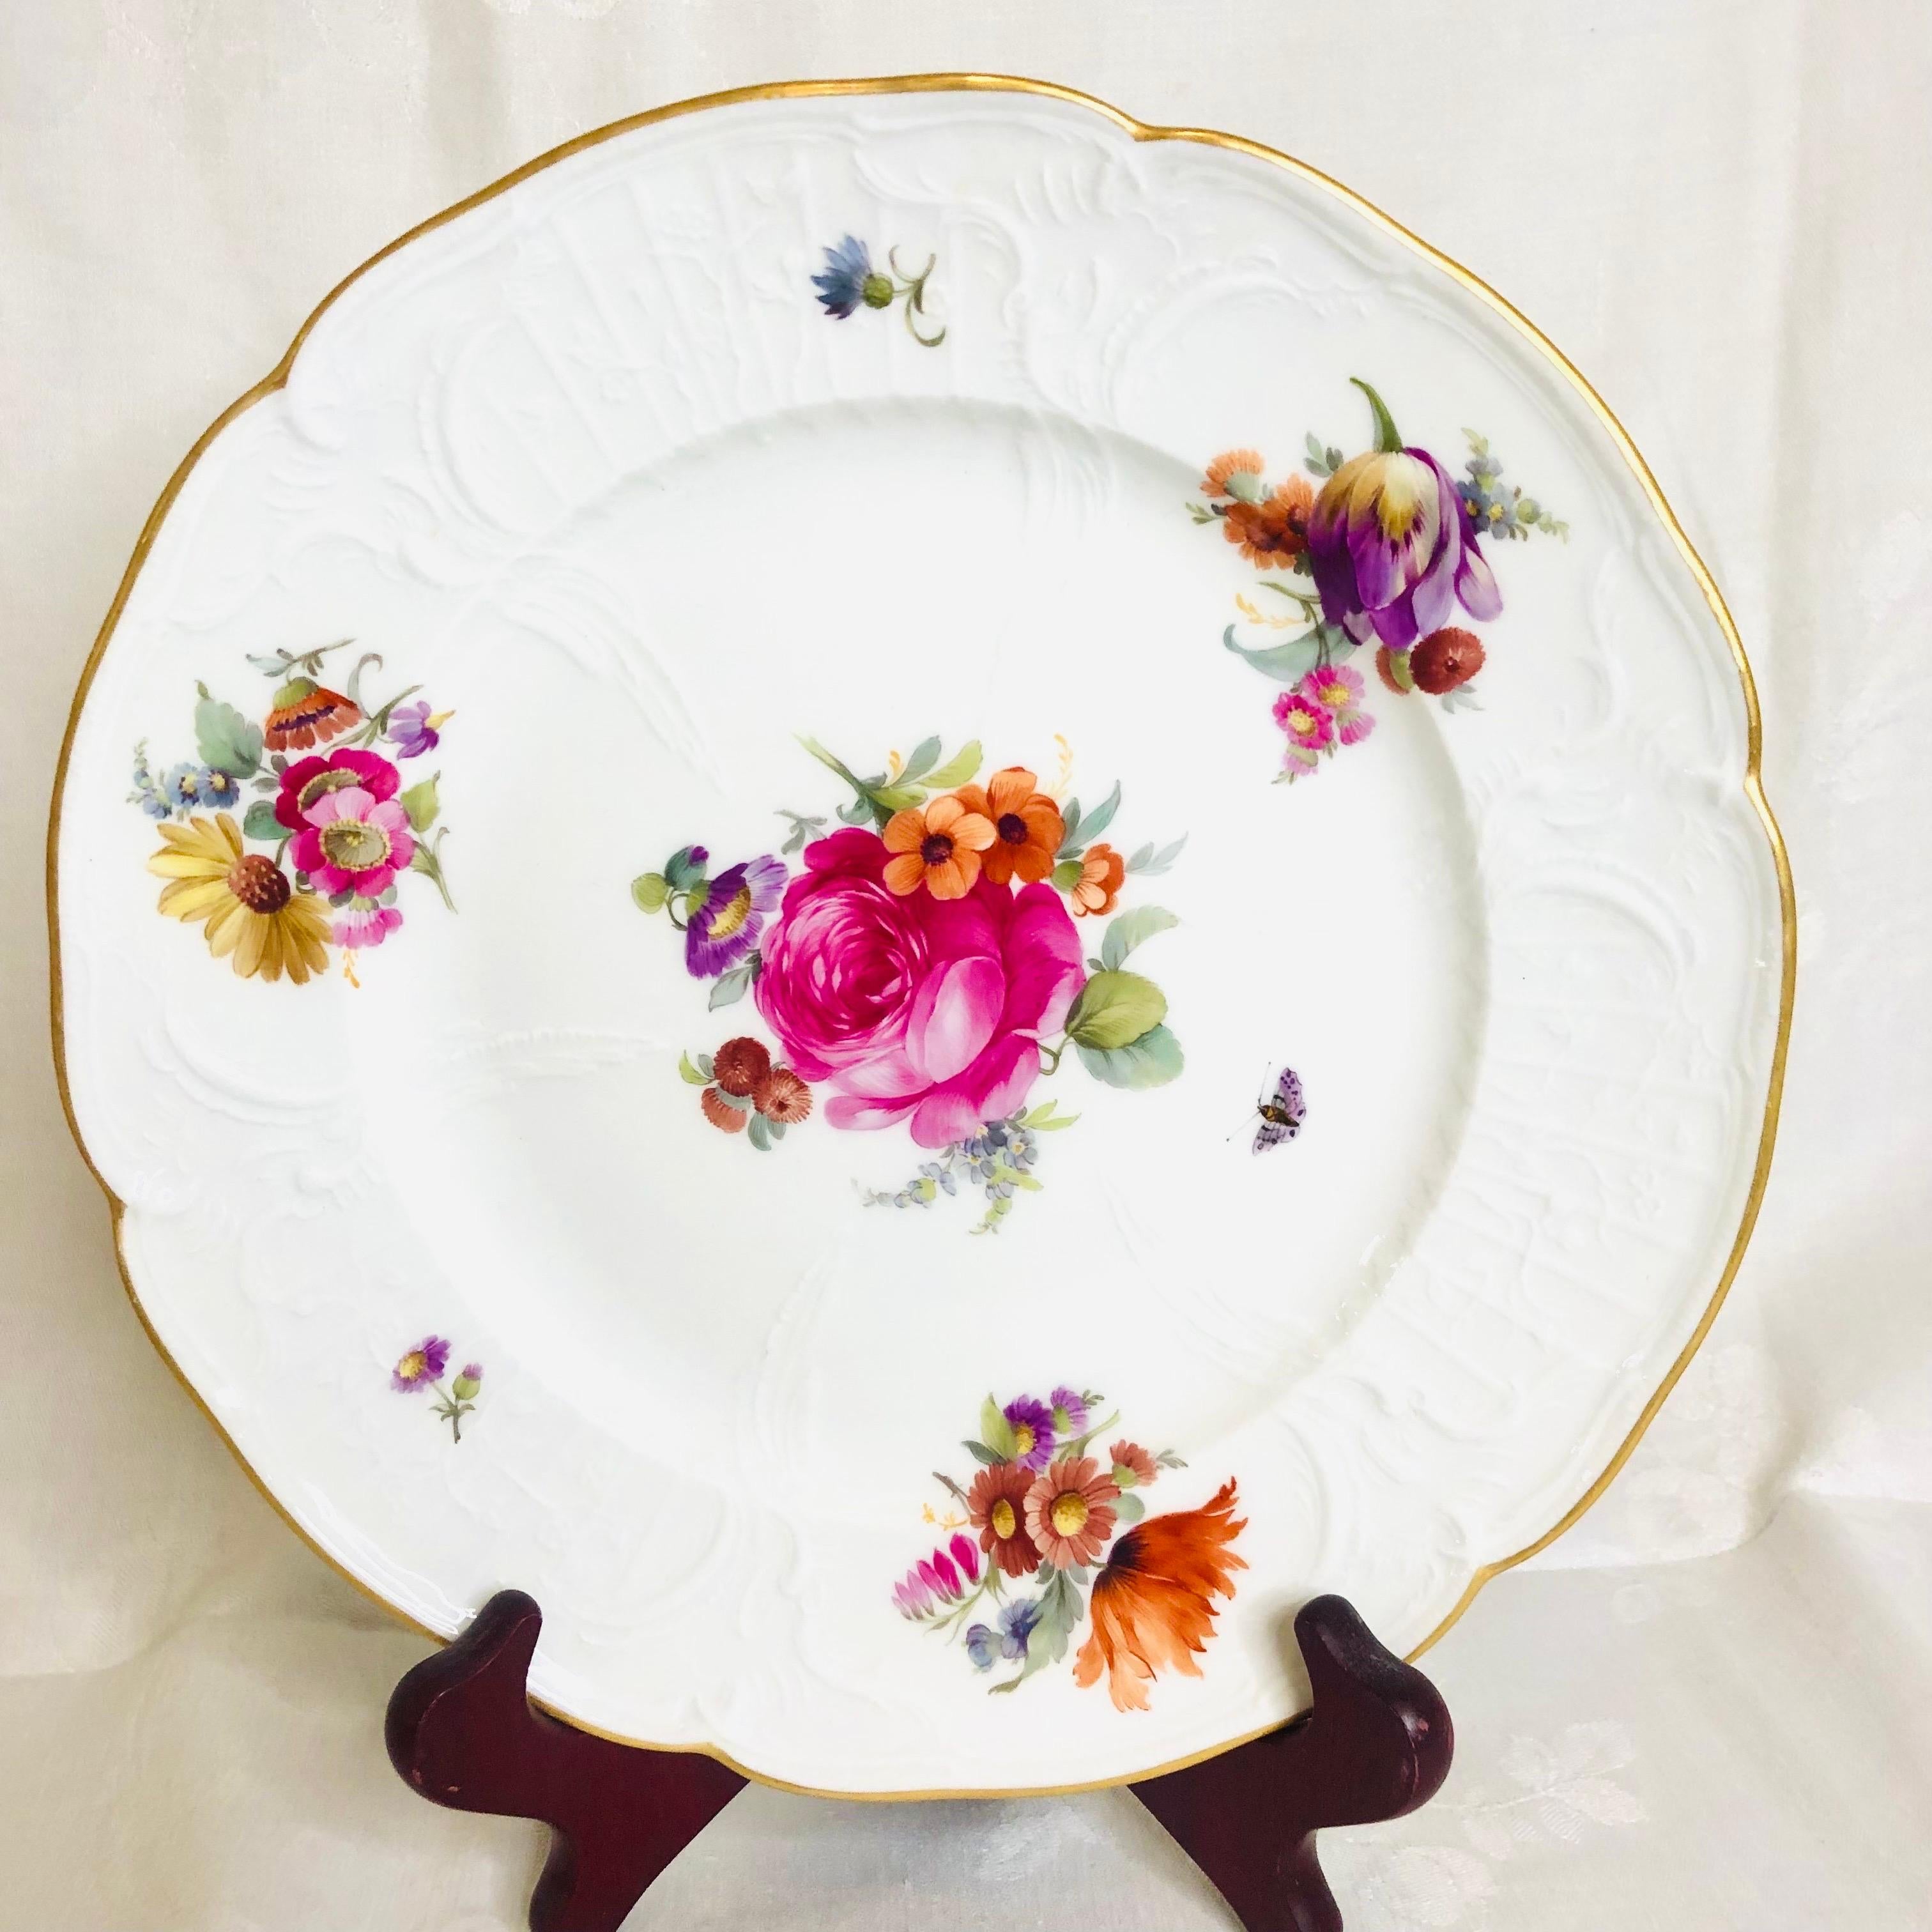 Set of 8 KPM Luncheon Plates Each Hand-Painted with a Different Flower Bouquet For Sale 5